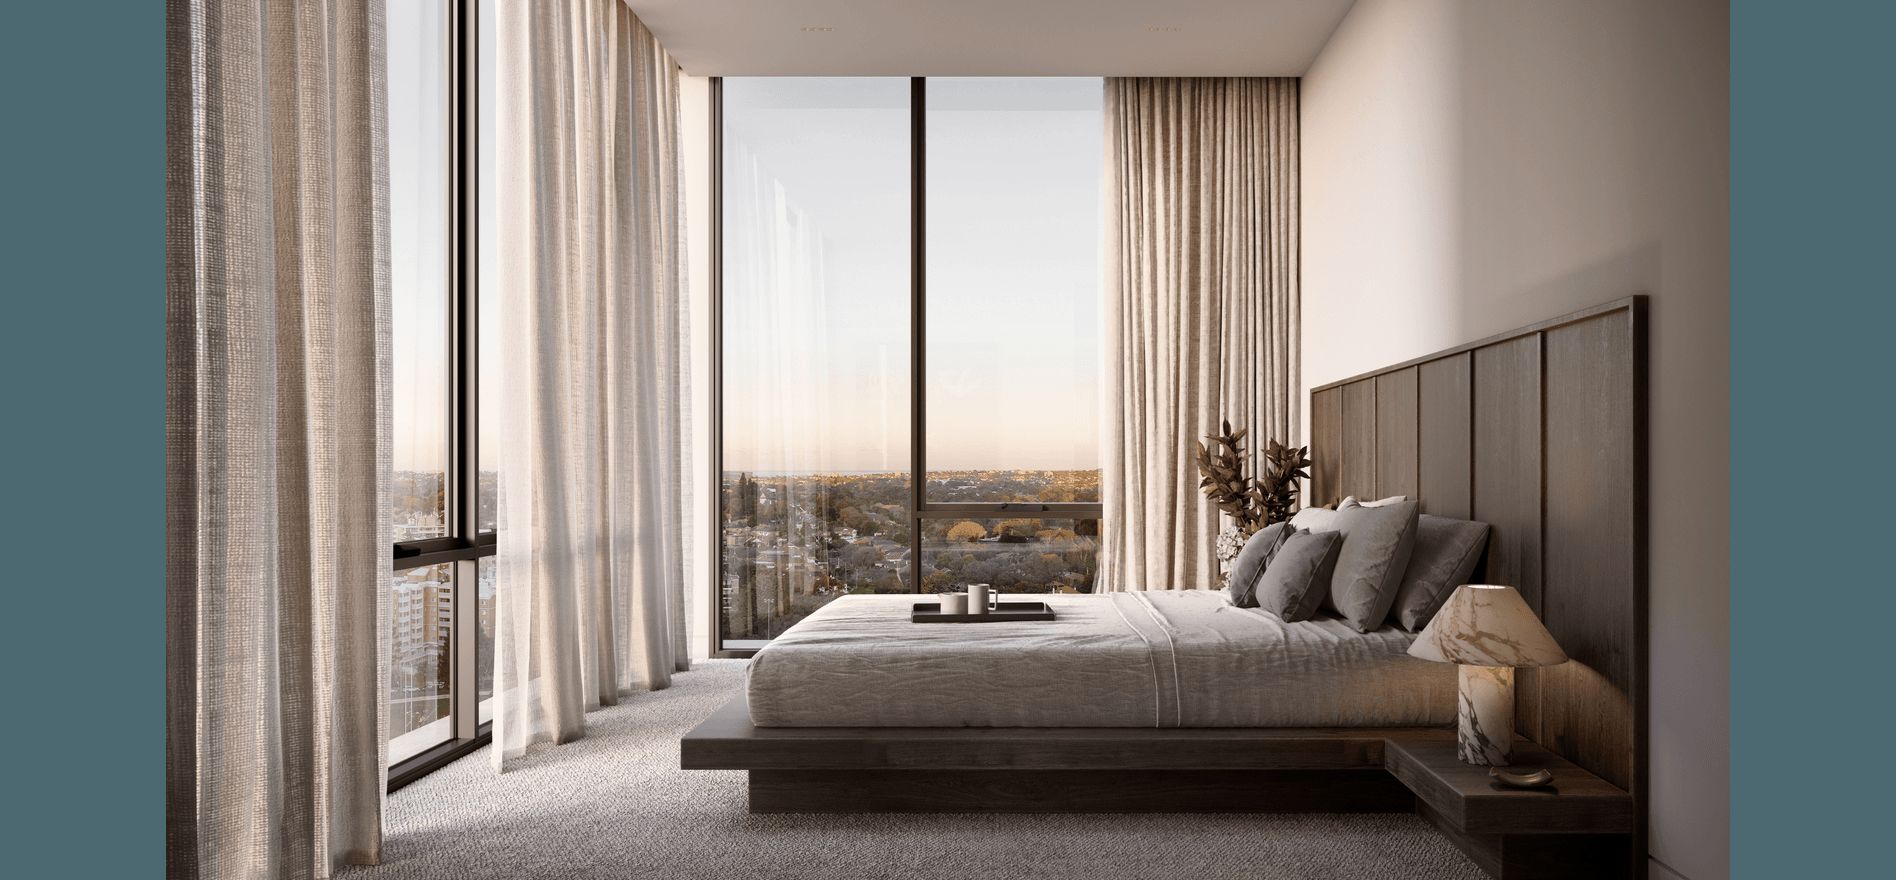 3 bedrooms New Apartments / Off the Plan in  MELBOURNE VIC, 3000